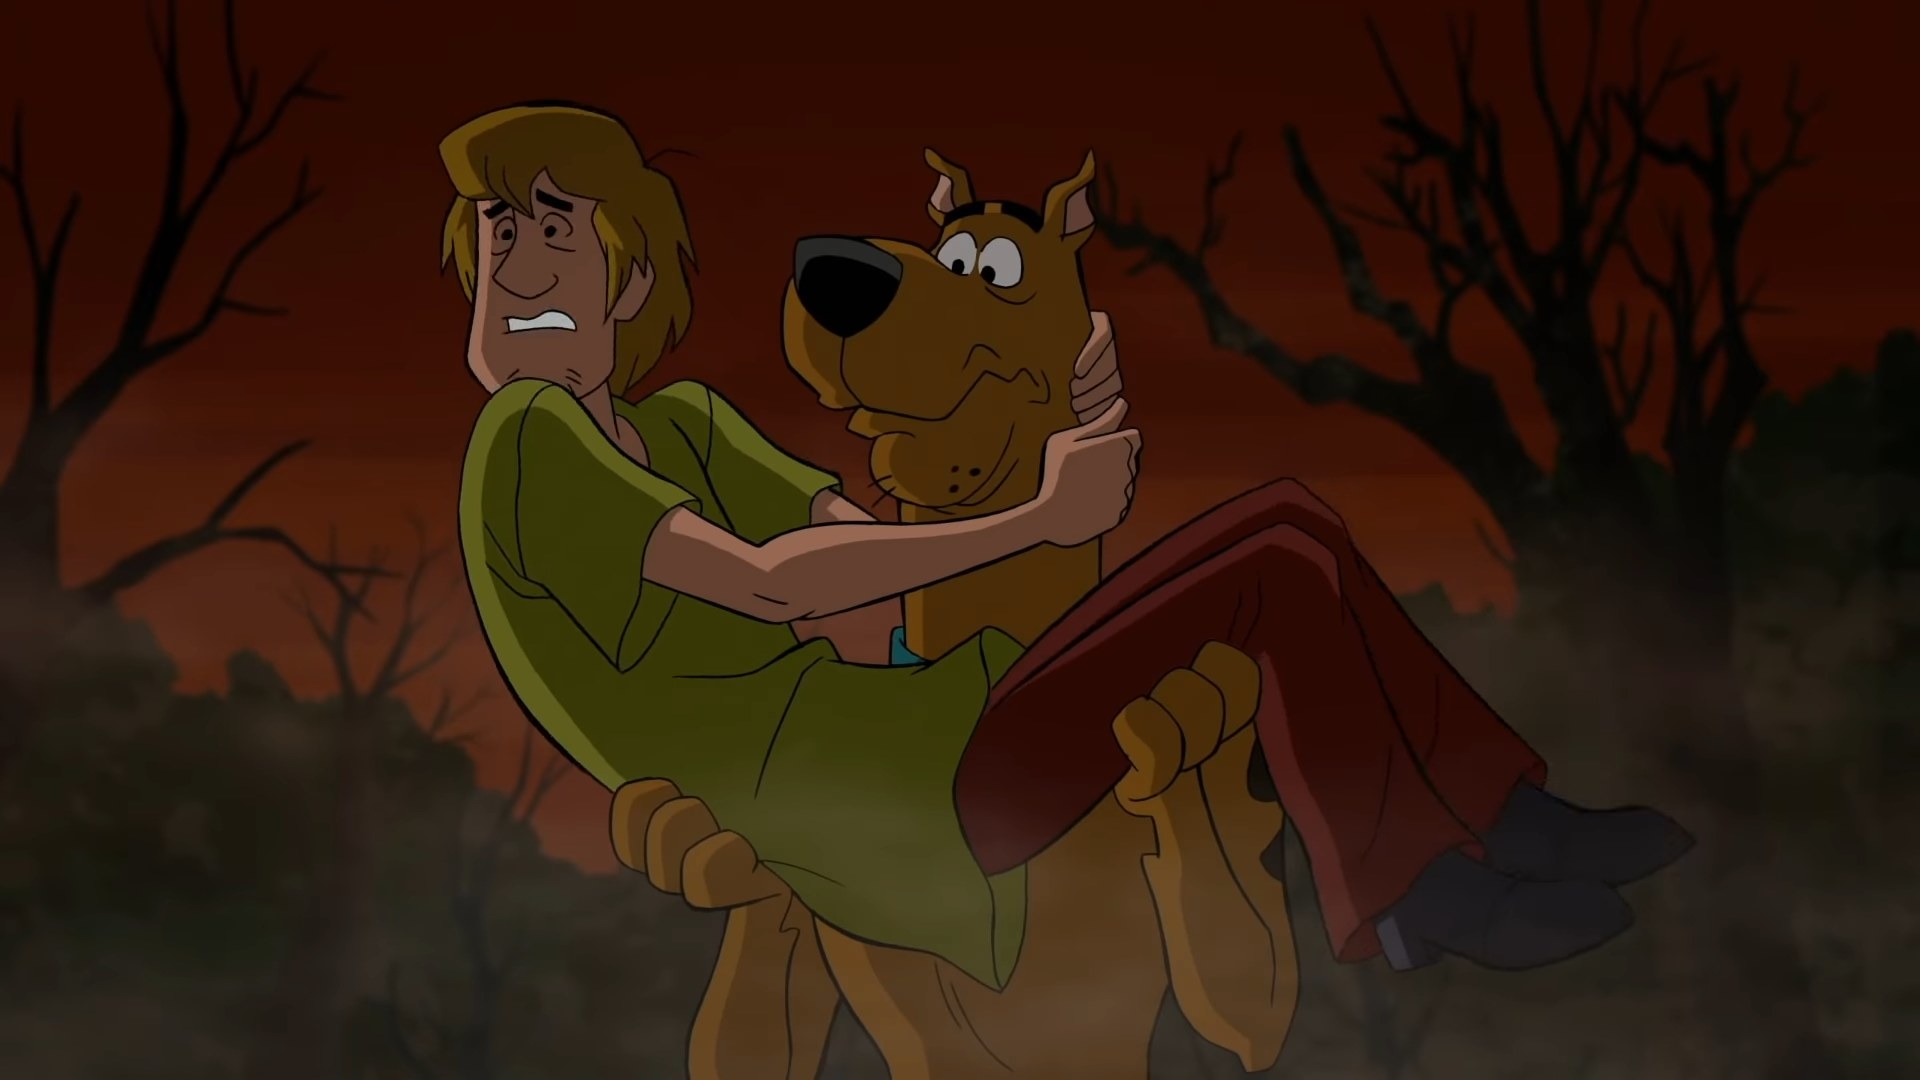 Scooby-Doo holding Shaggy in his arms